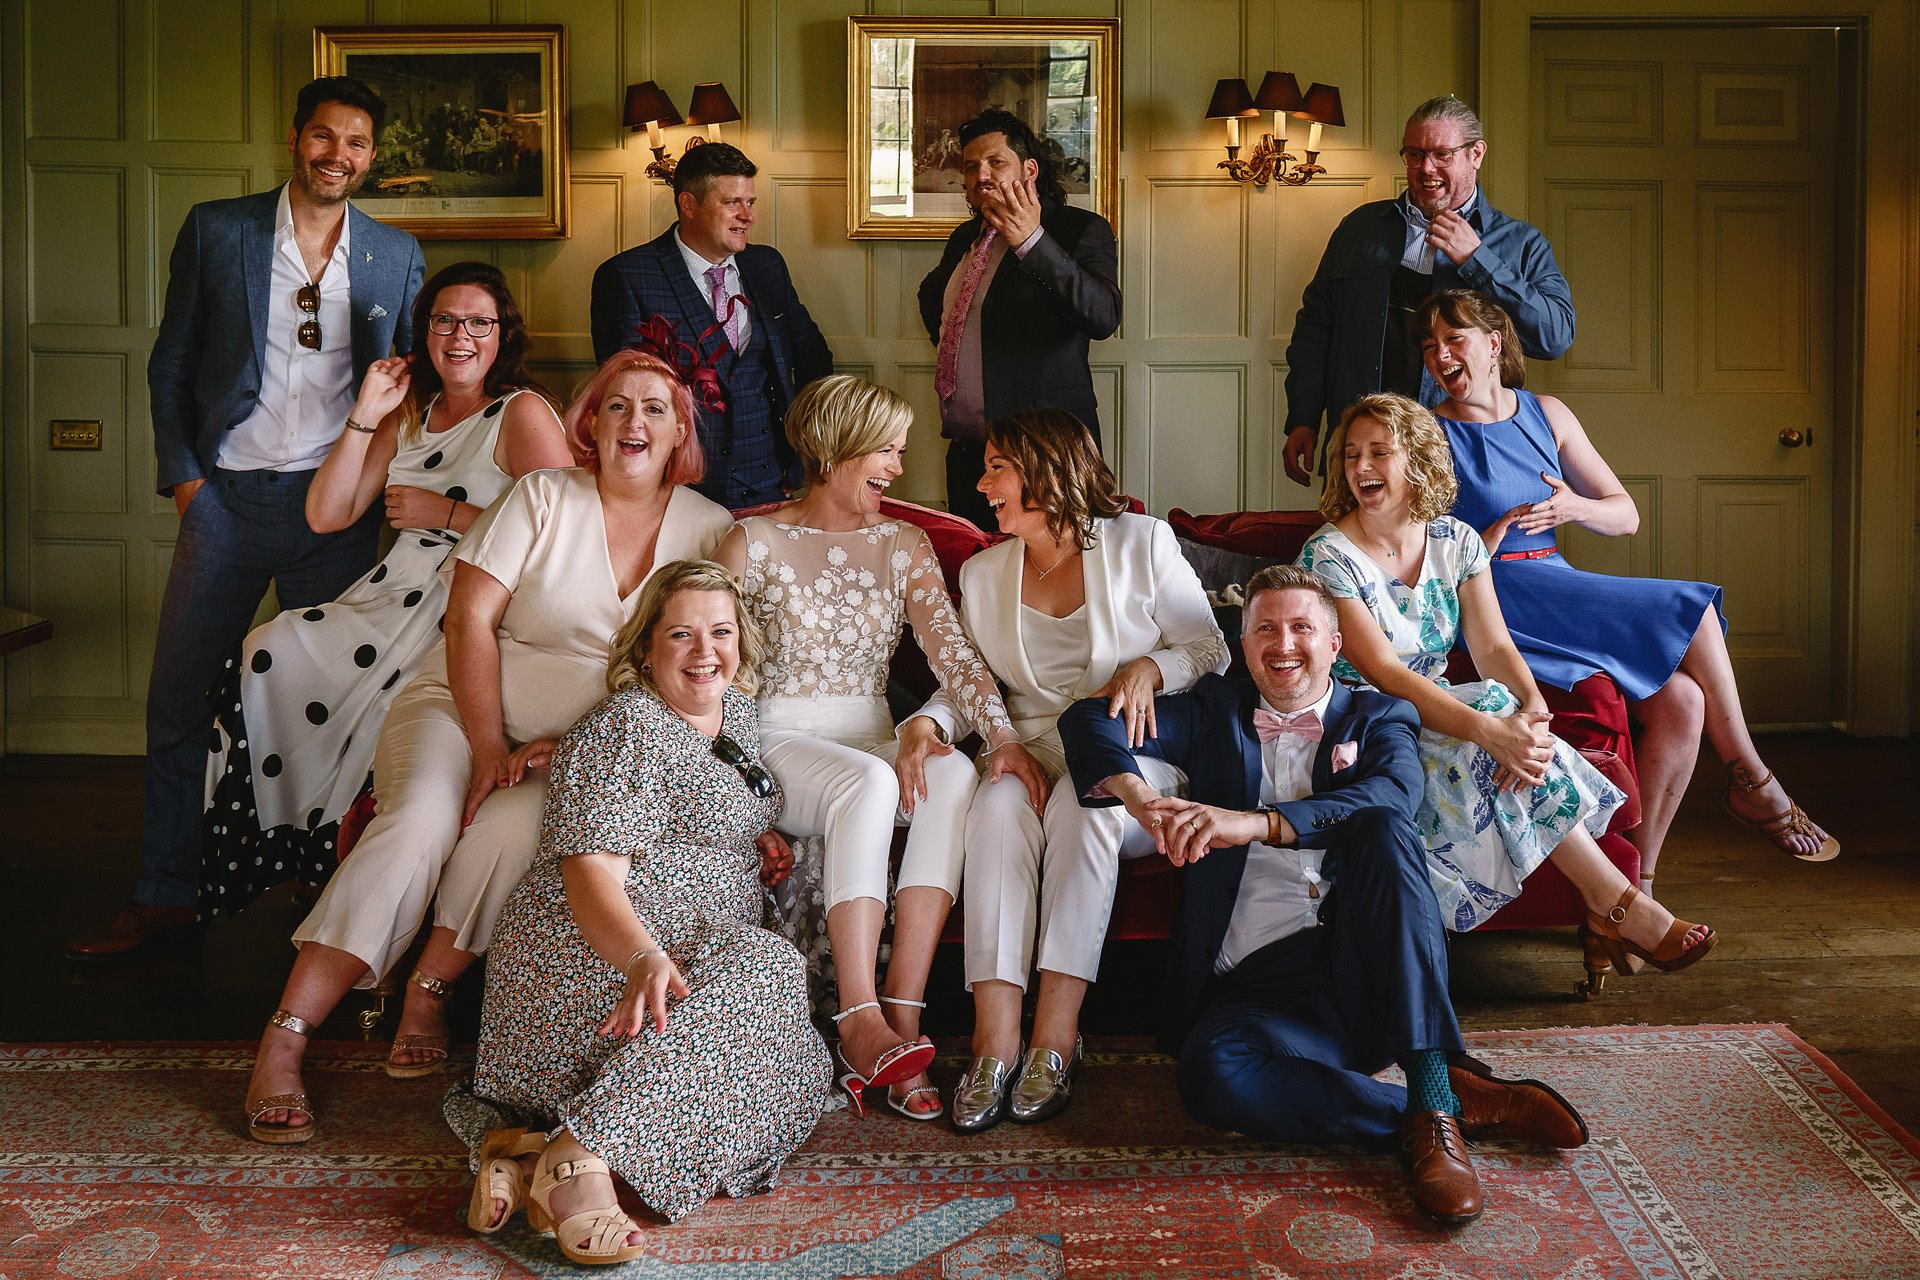 Vanity fair style wedding photo of a group at a lesbian wedding at stately home elmore court